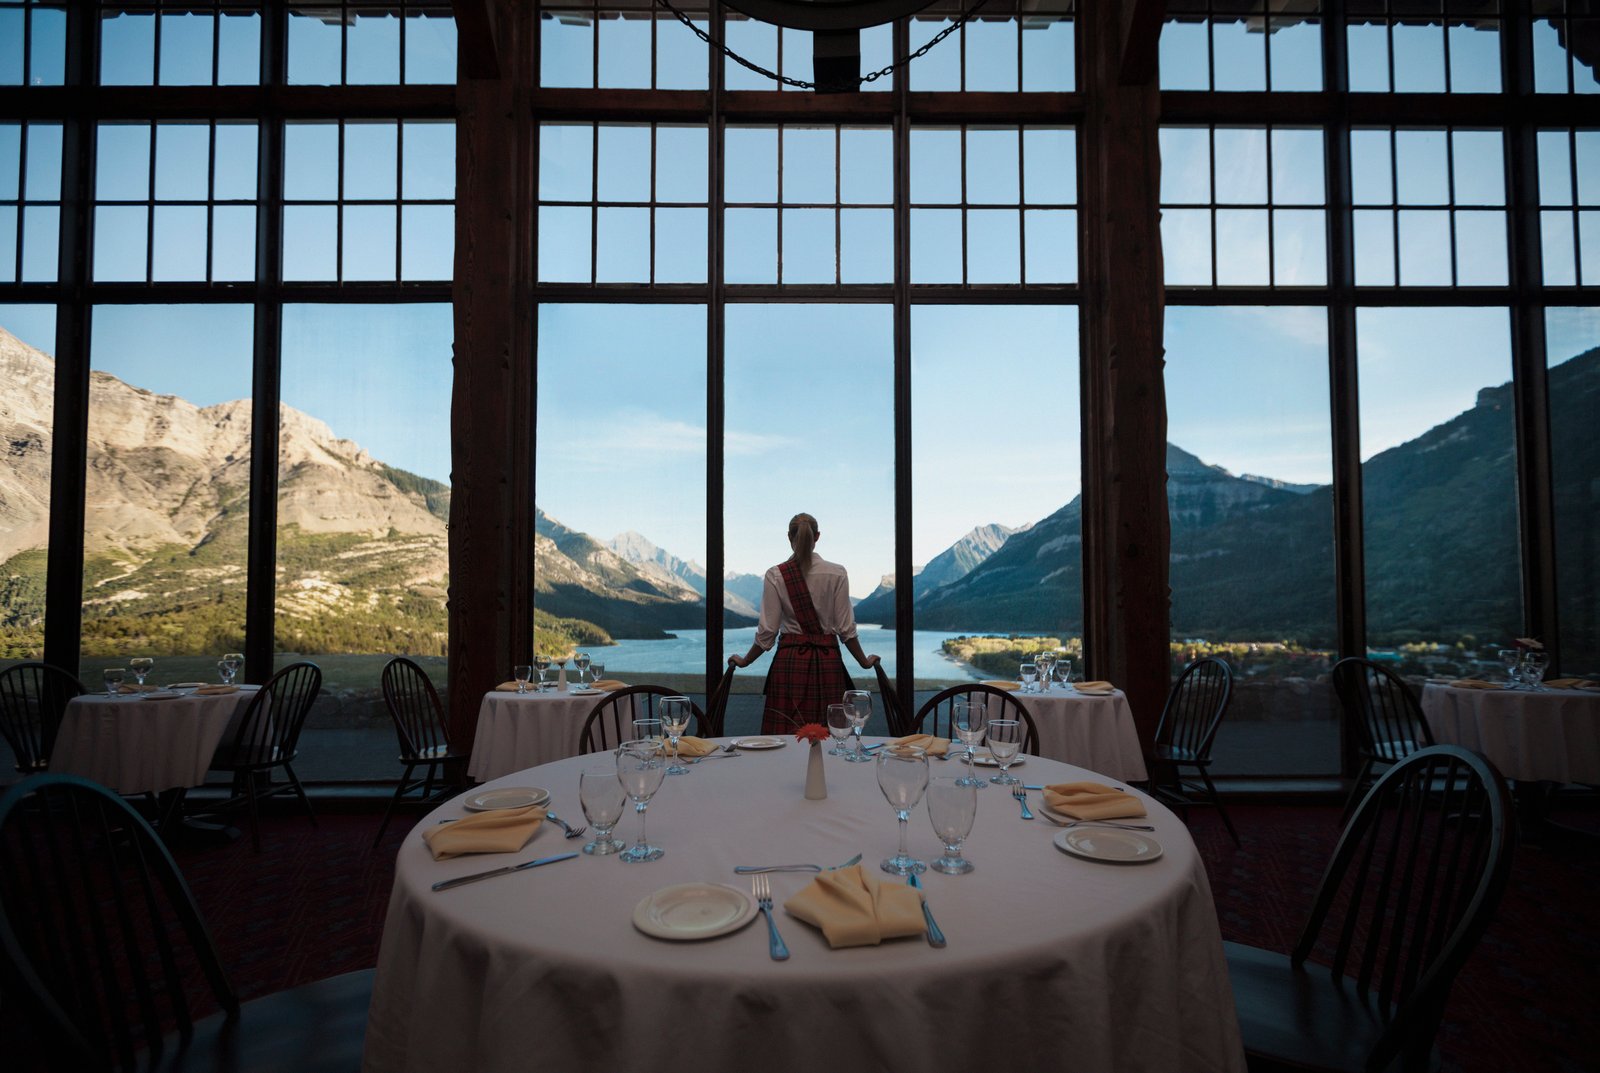 Waitress looking out restaurant windows to the lake at the Price of Wales Hotel in Waterton.